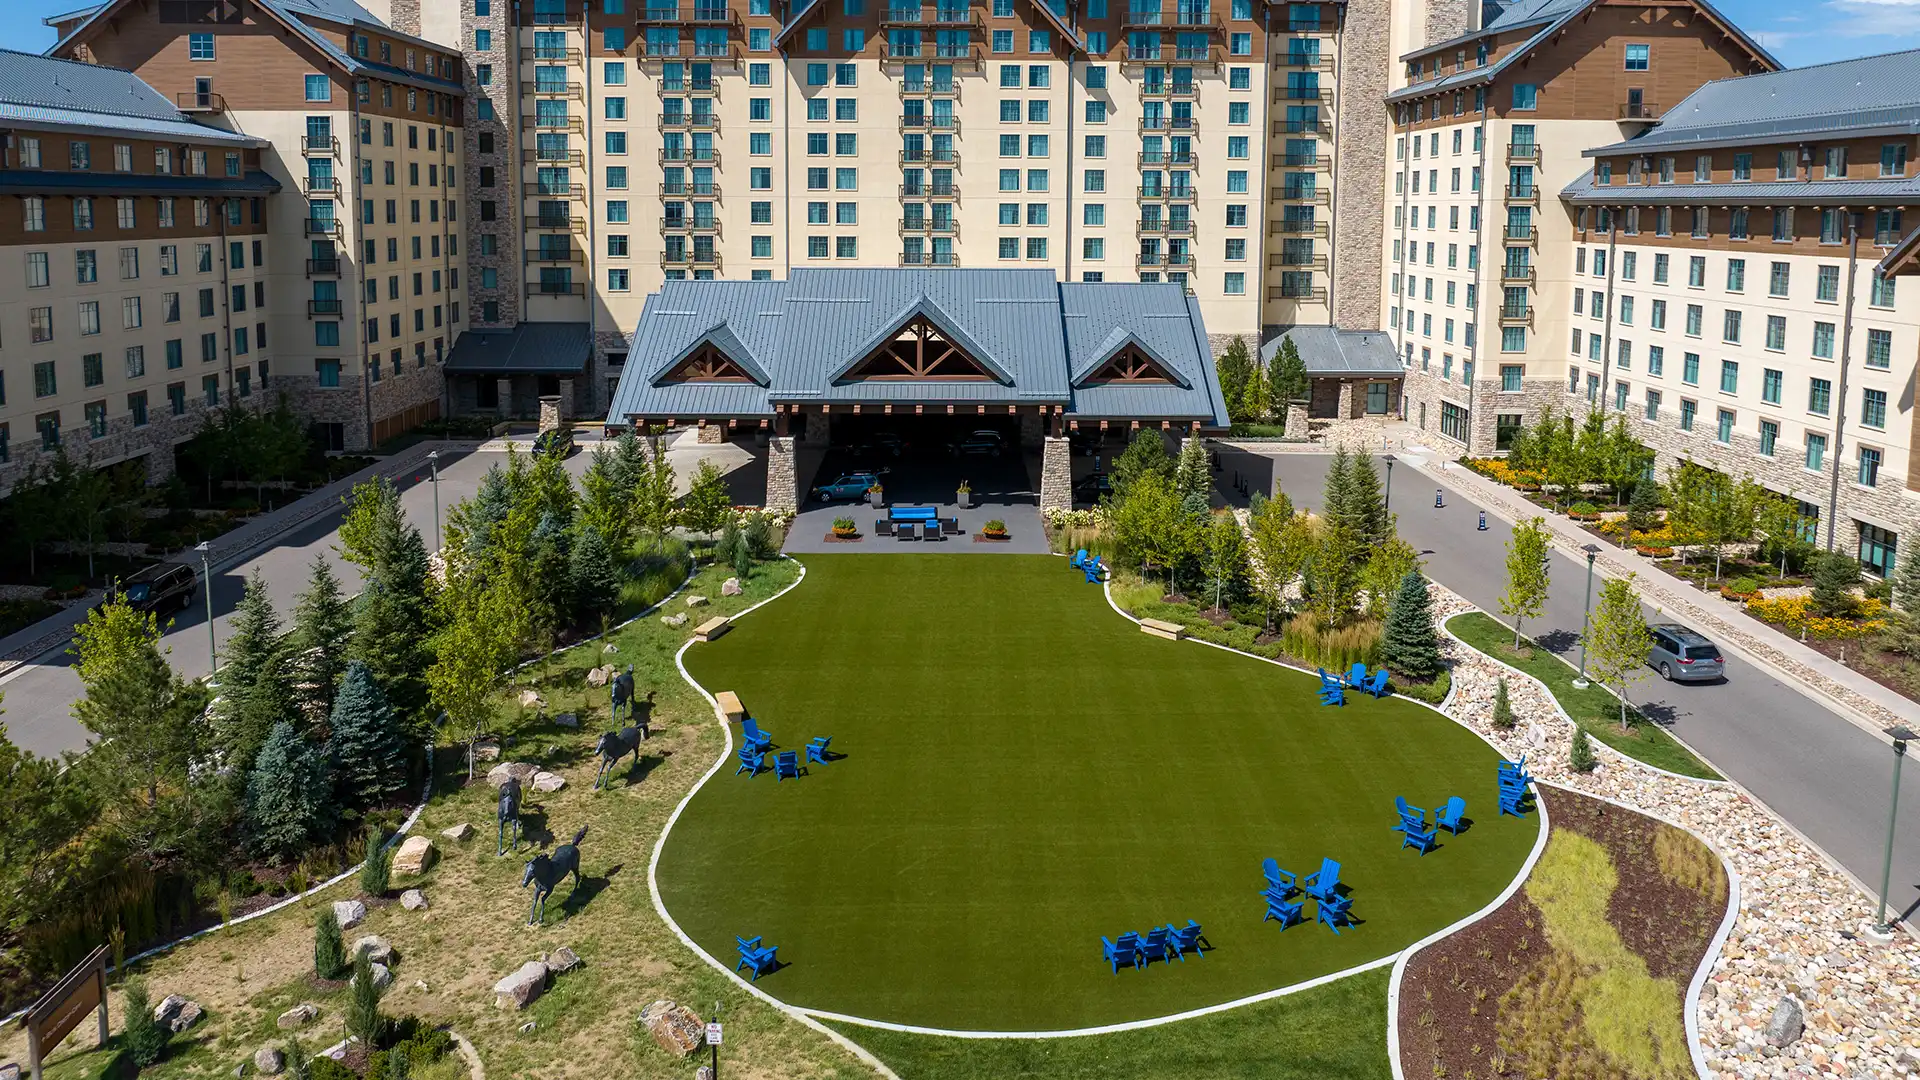 Denver Area Alpine Resort Provides Guests with Luxurious Outdoor Spaces